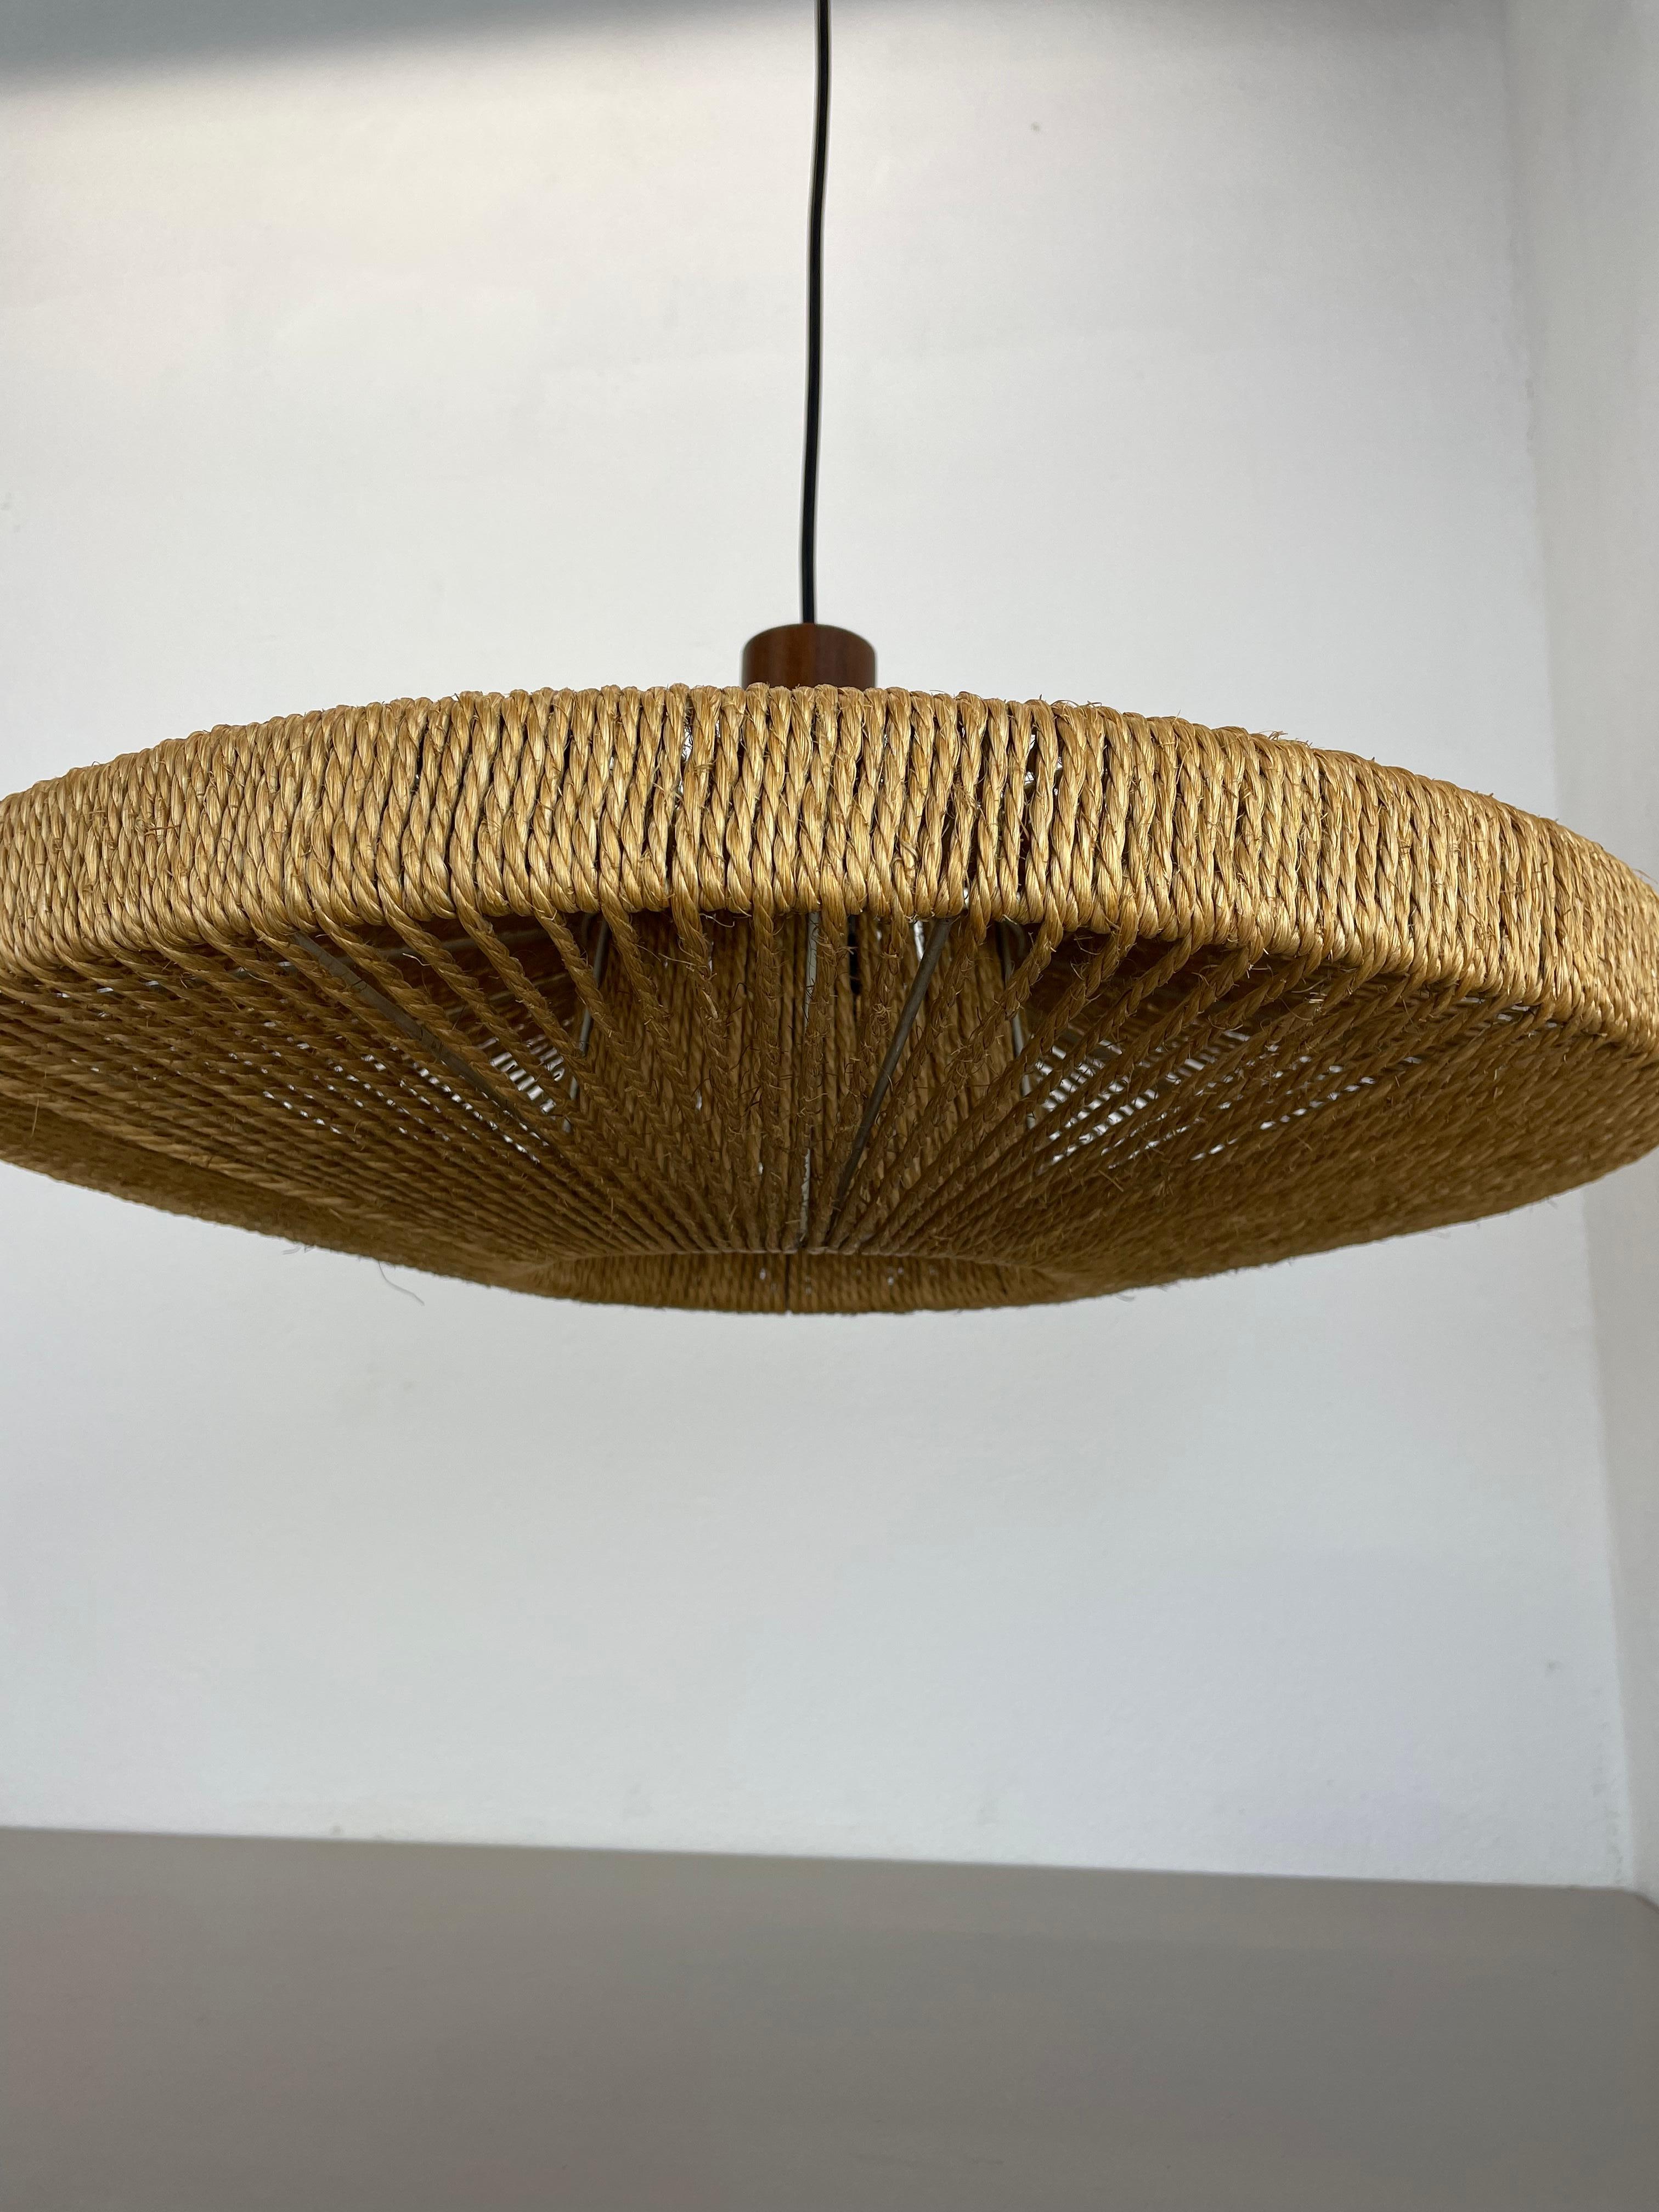 Mid-Century Modern 56cm Organic Sisal and Teak Ufo Hanging Light Made by Temde Lights Germany 1960s For Sale